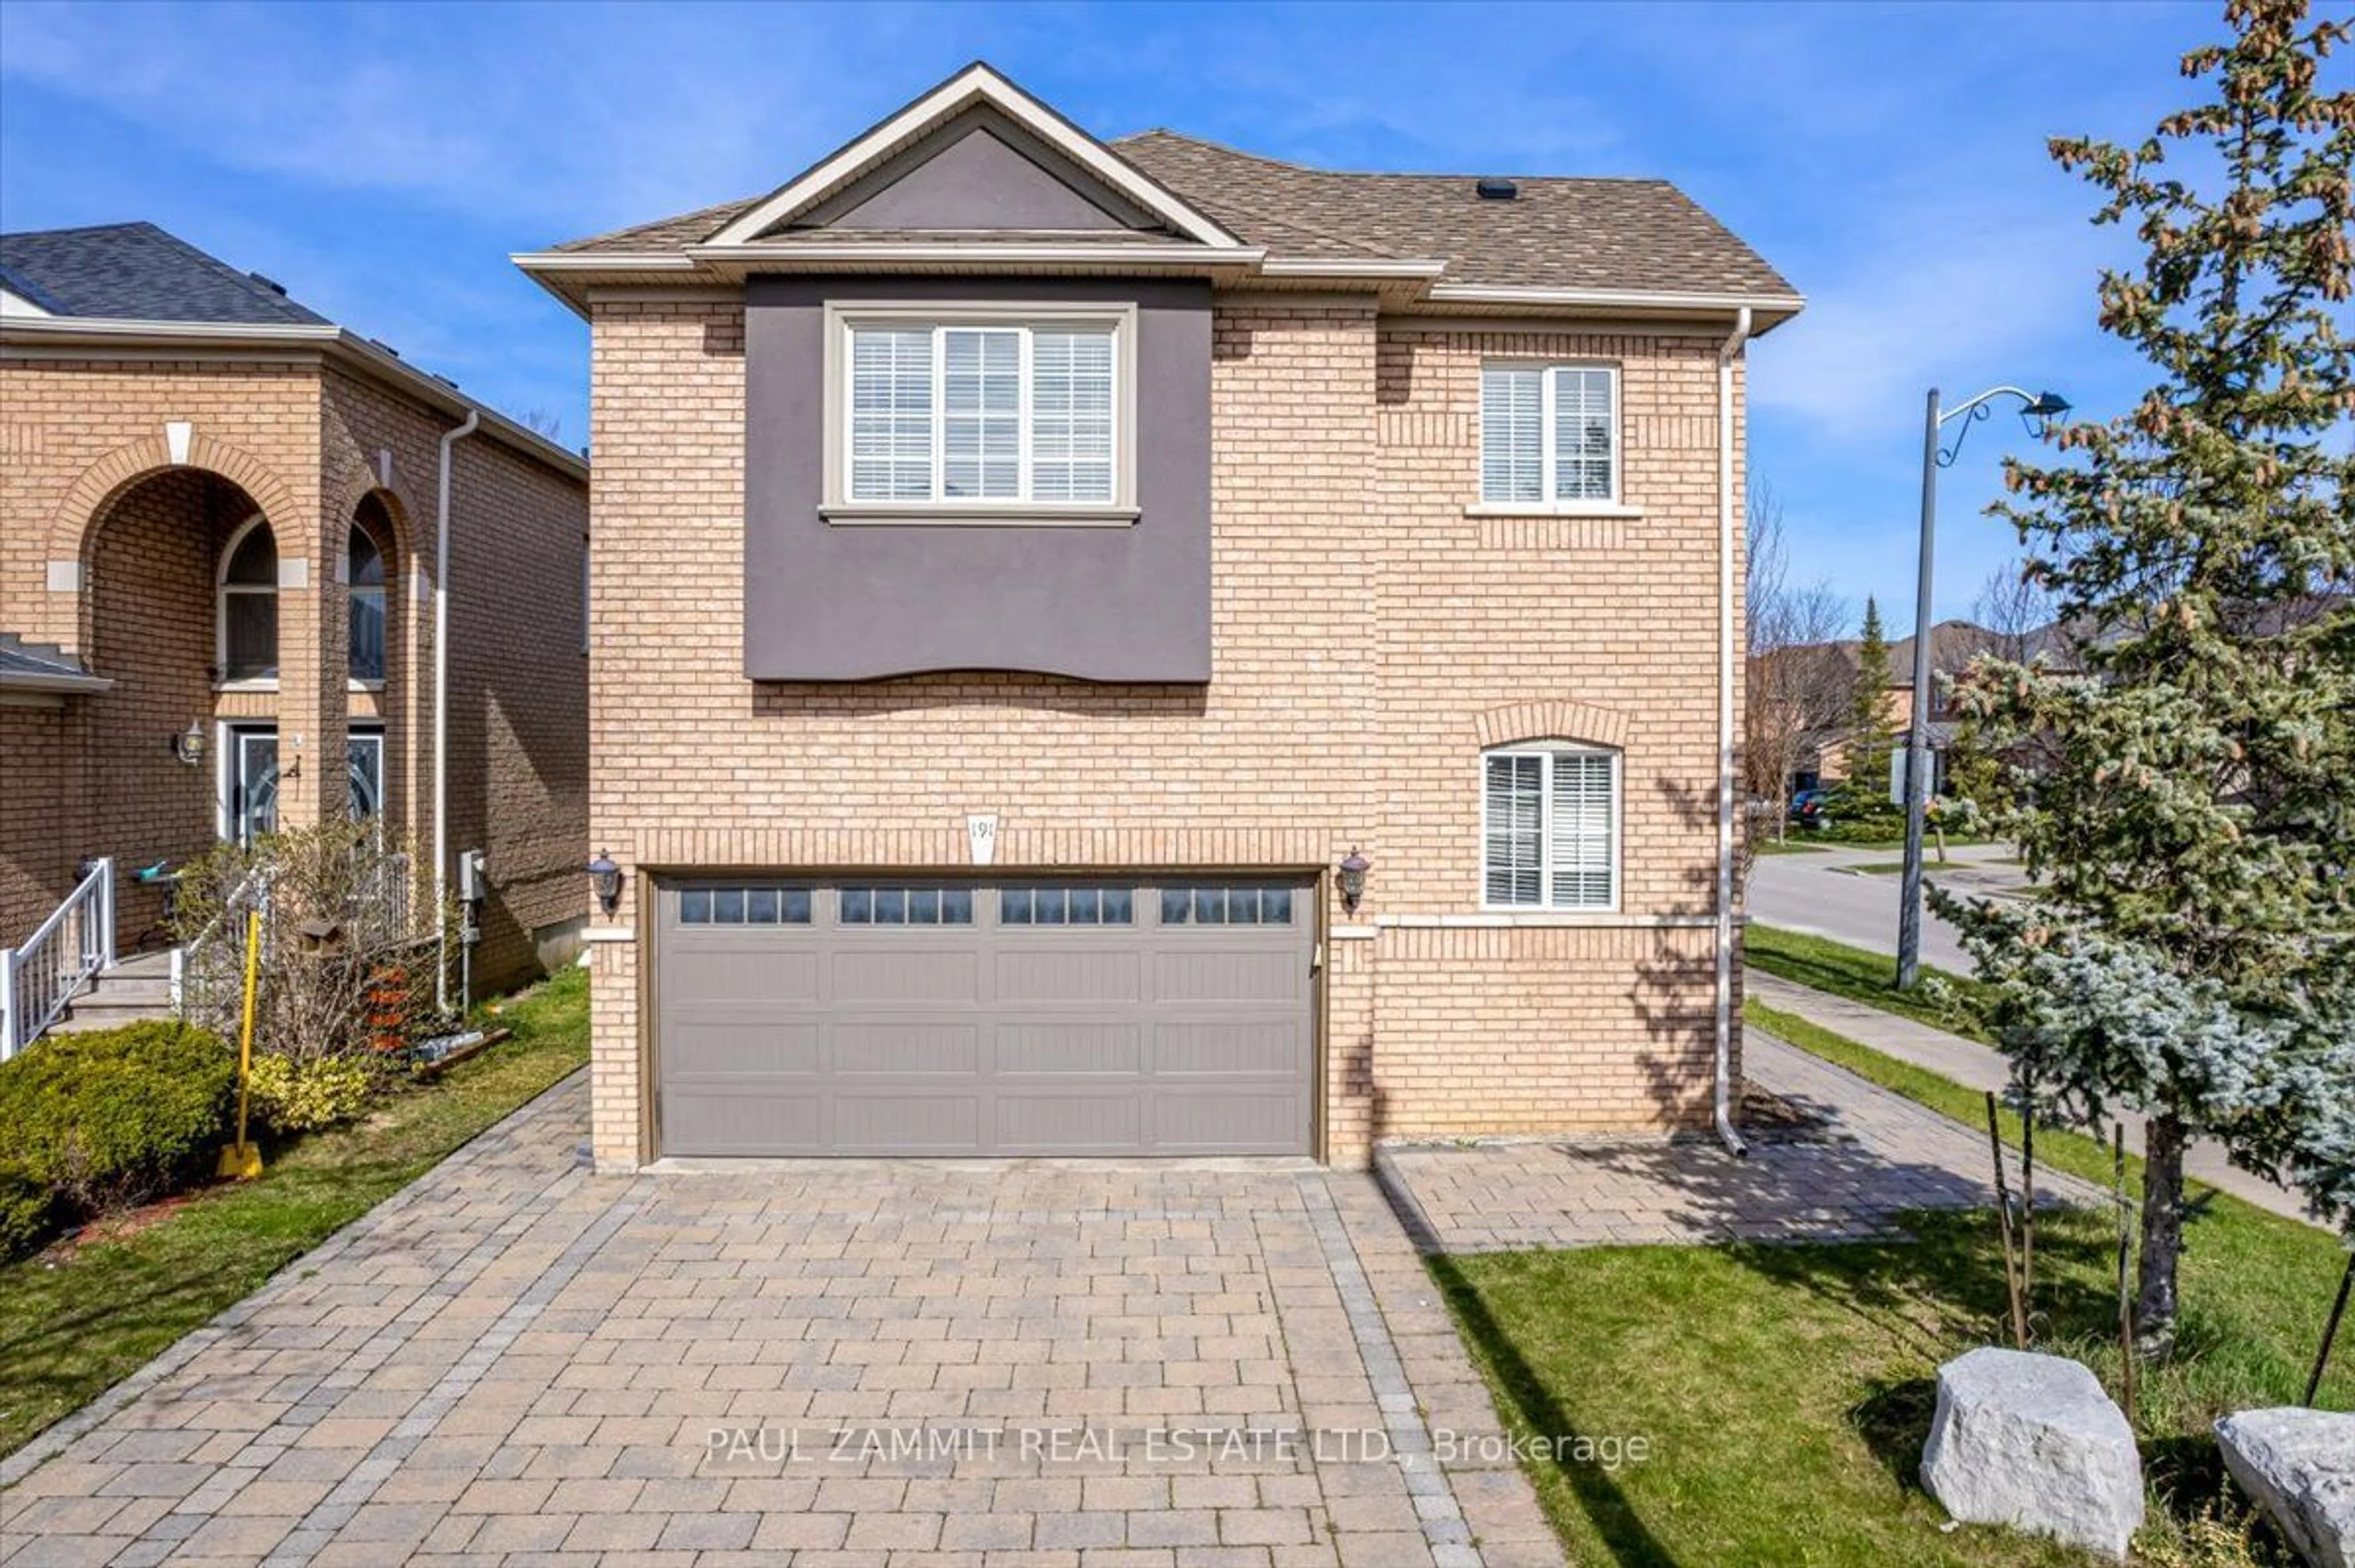 Home with brick exterior material for 191 Lio Ave, Vaughan Ontario L4H 2S3